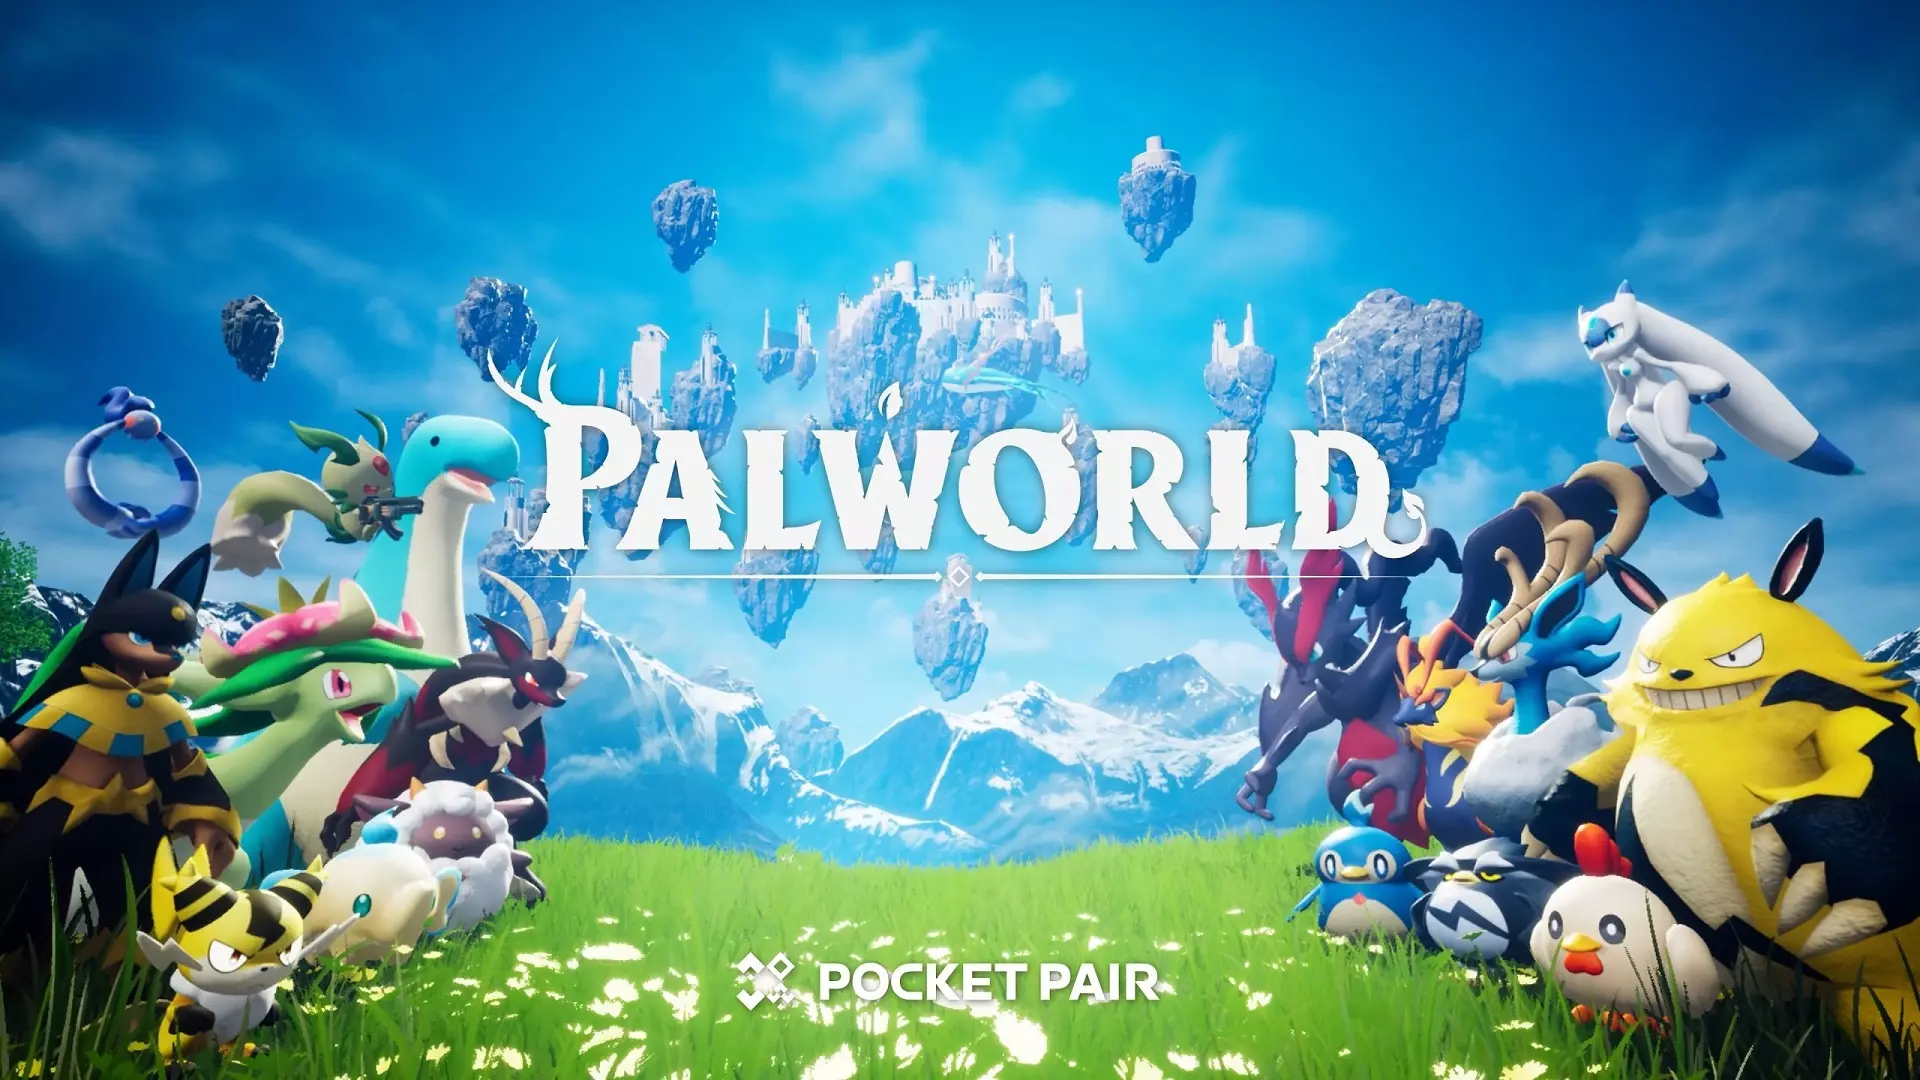 Palworld PC Specs & Requirements